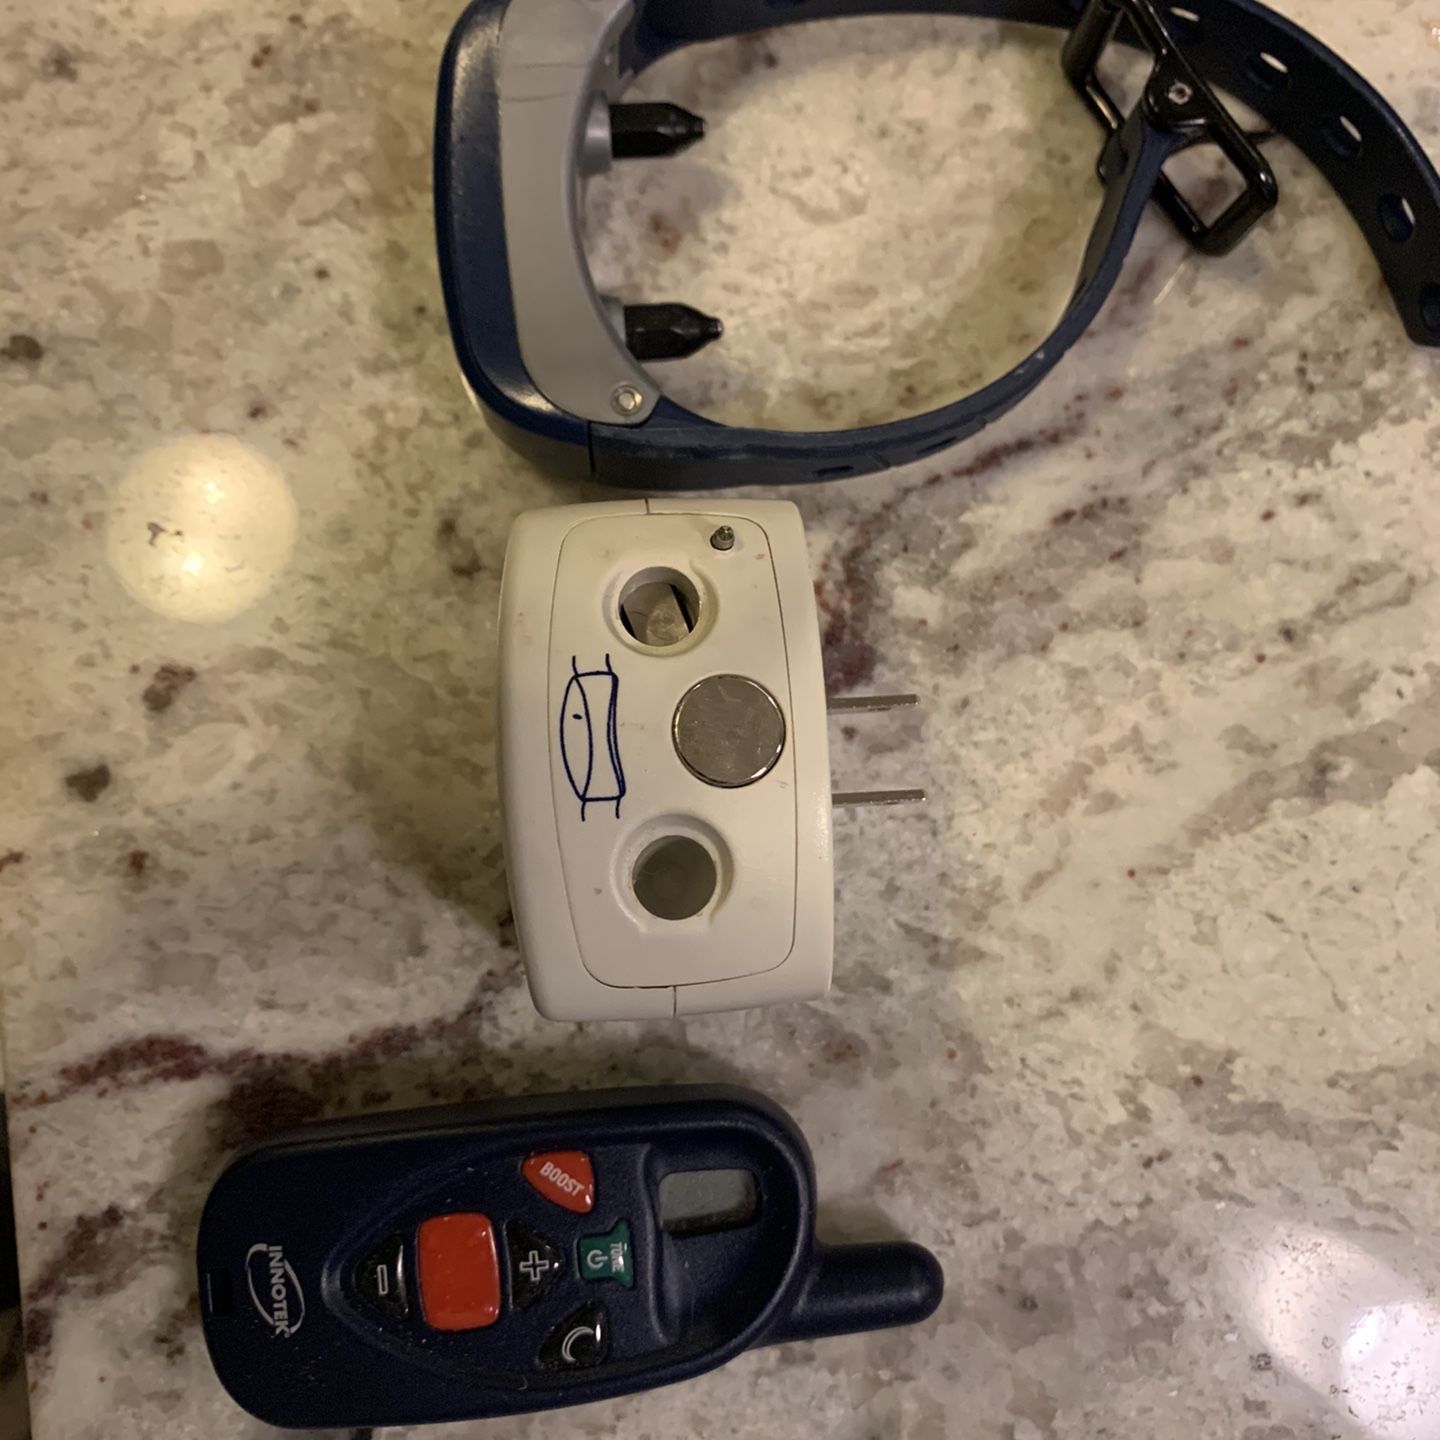 Innotek Professional Dog Training Collar. Remote, Charger And Collar. Great Condition.